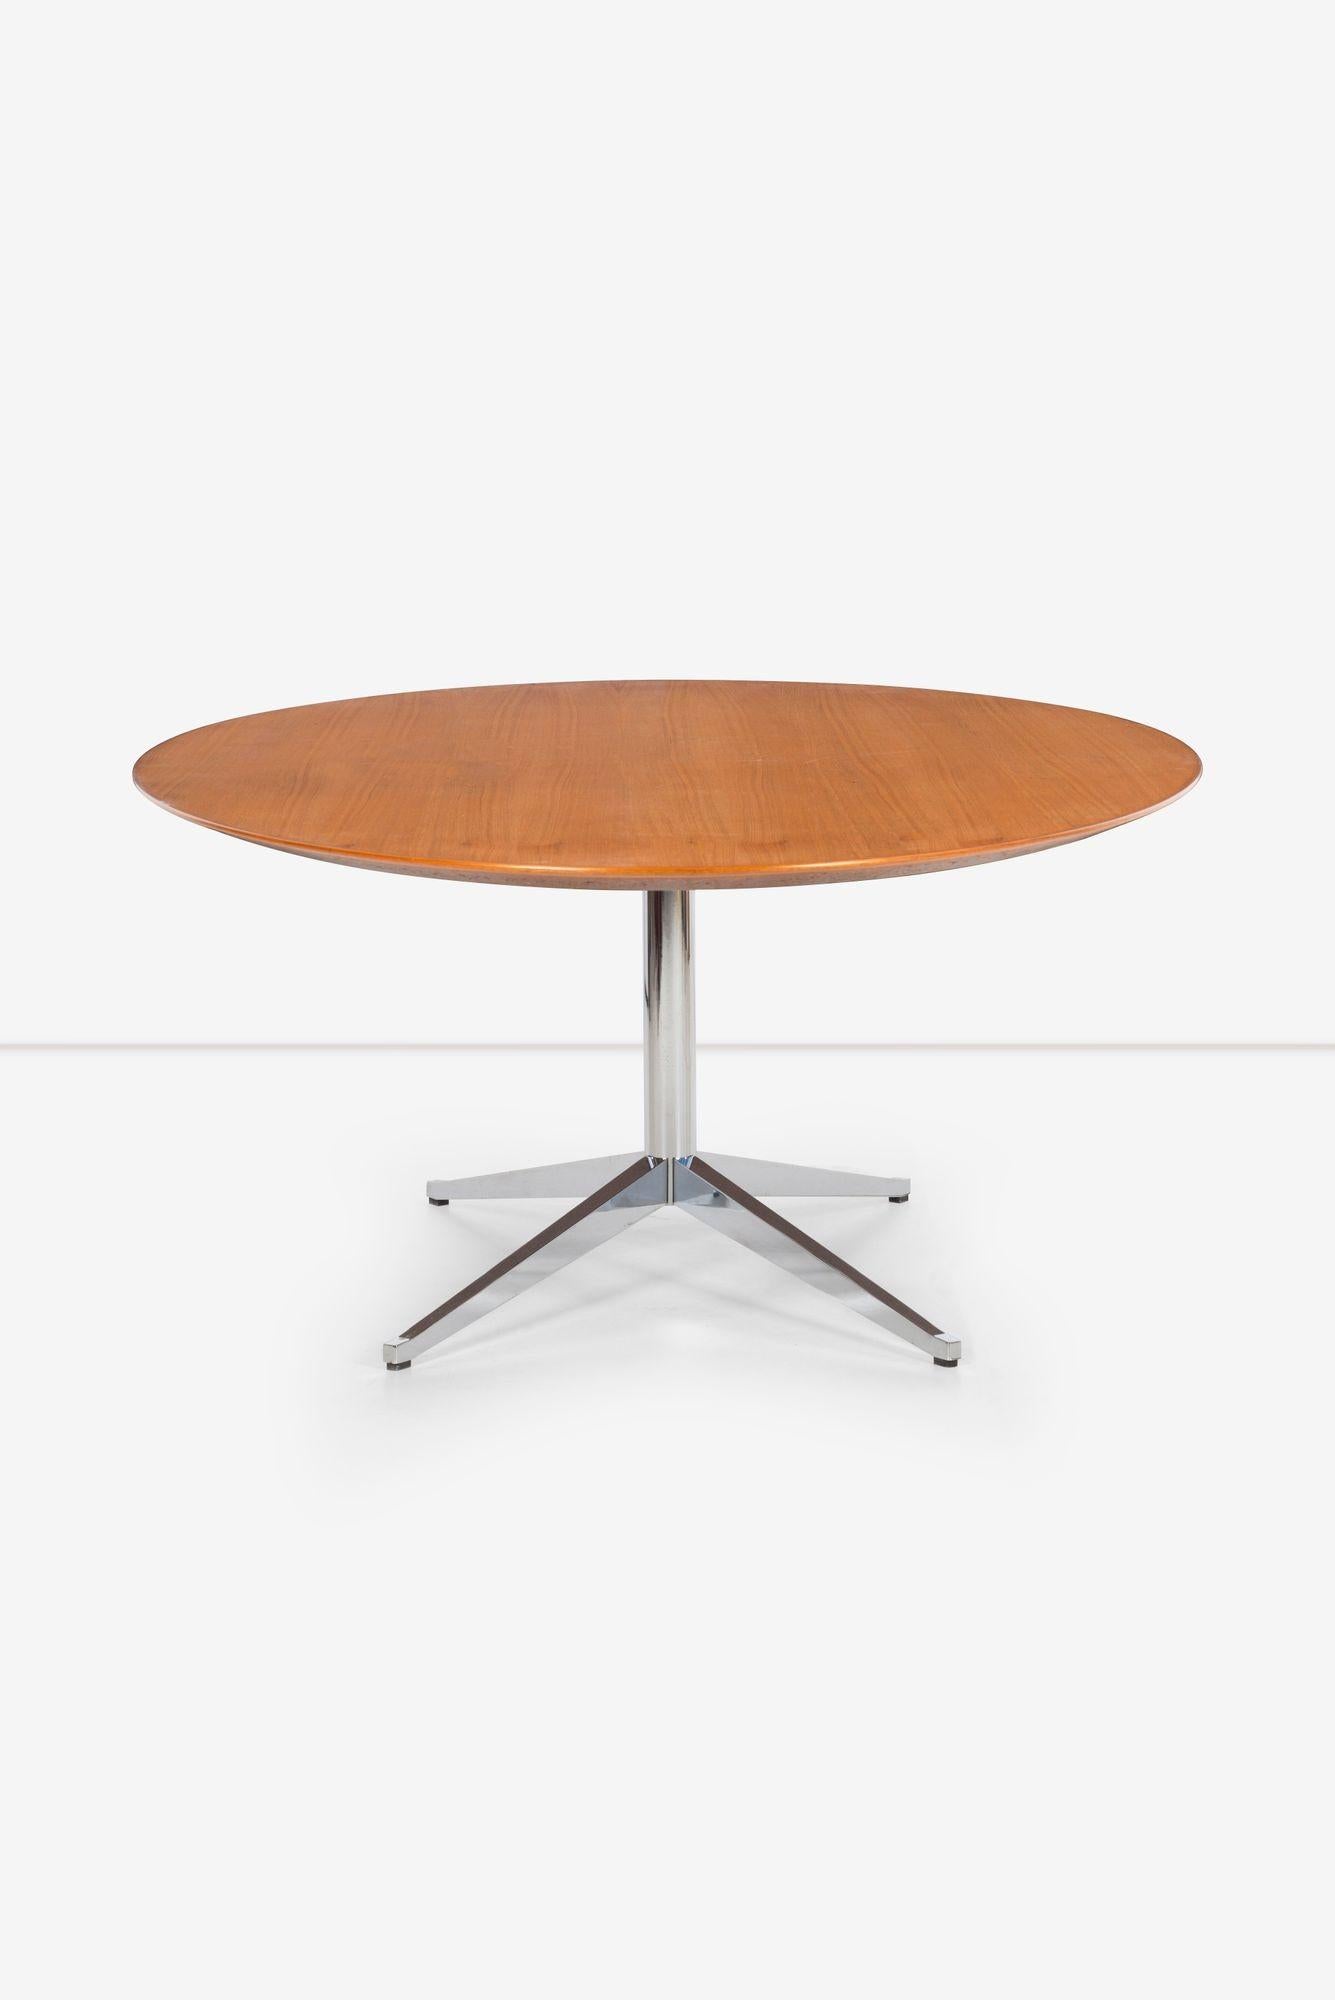 American Florence Knoll Dining Table with Cherry Wood Beveled Edge Top For Sale